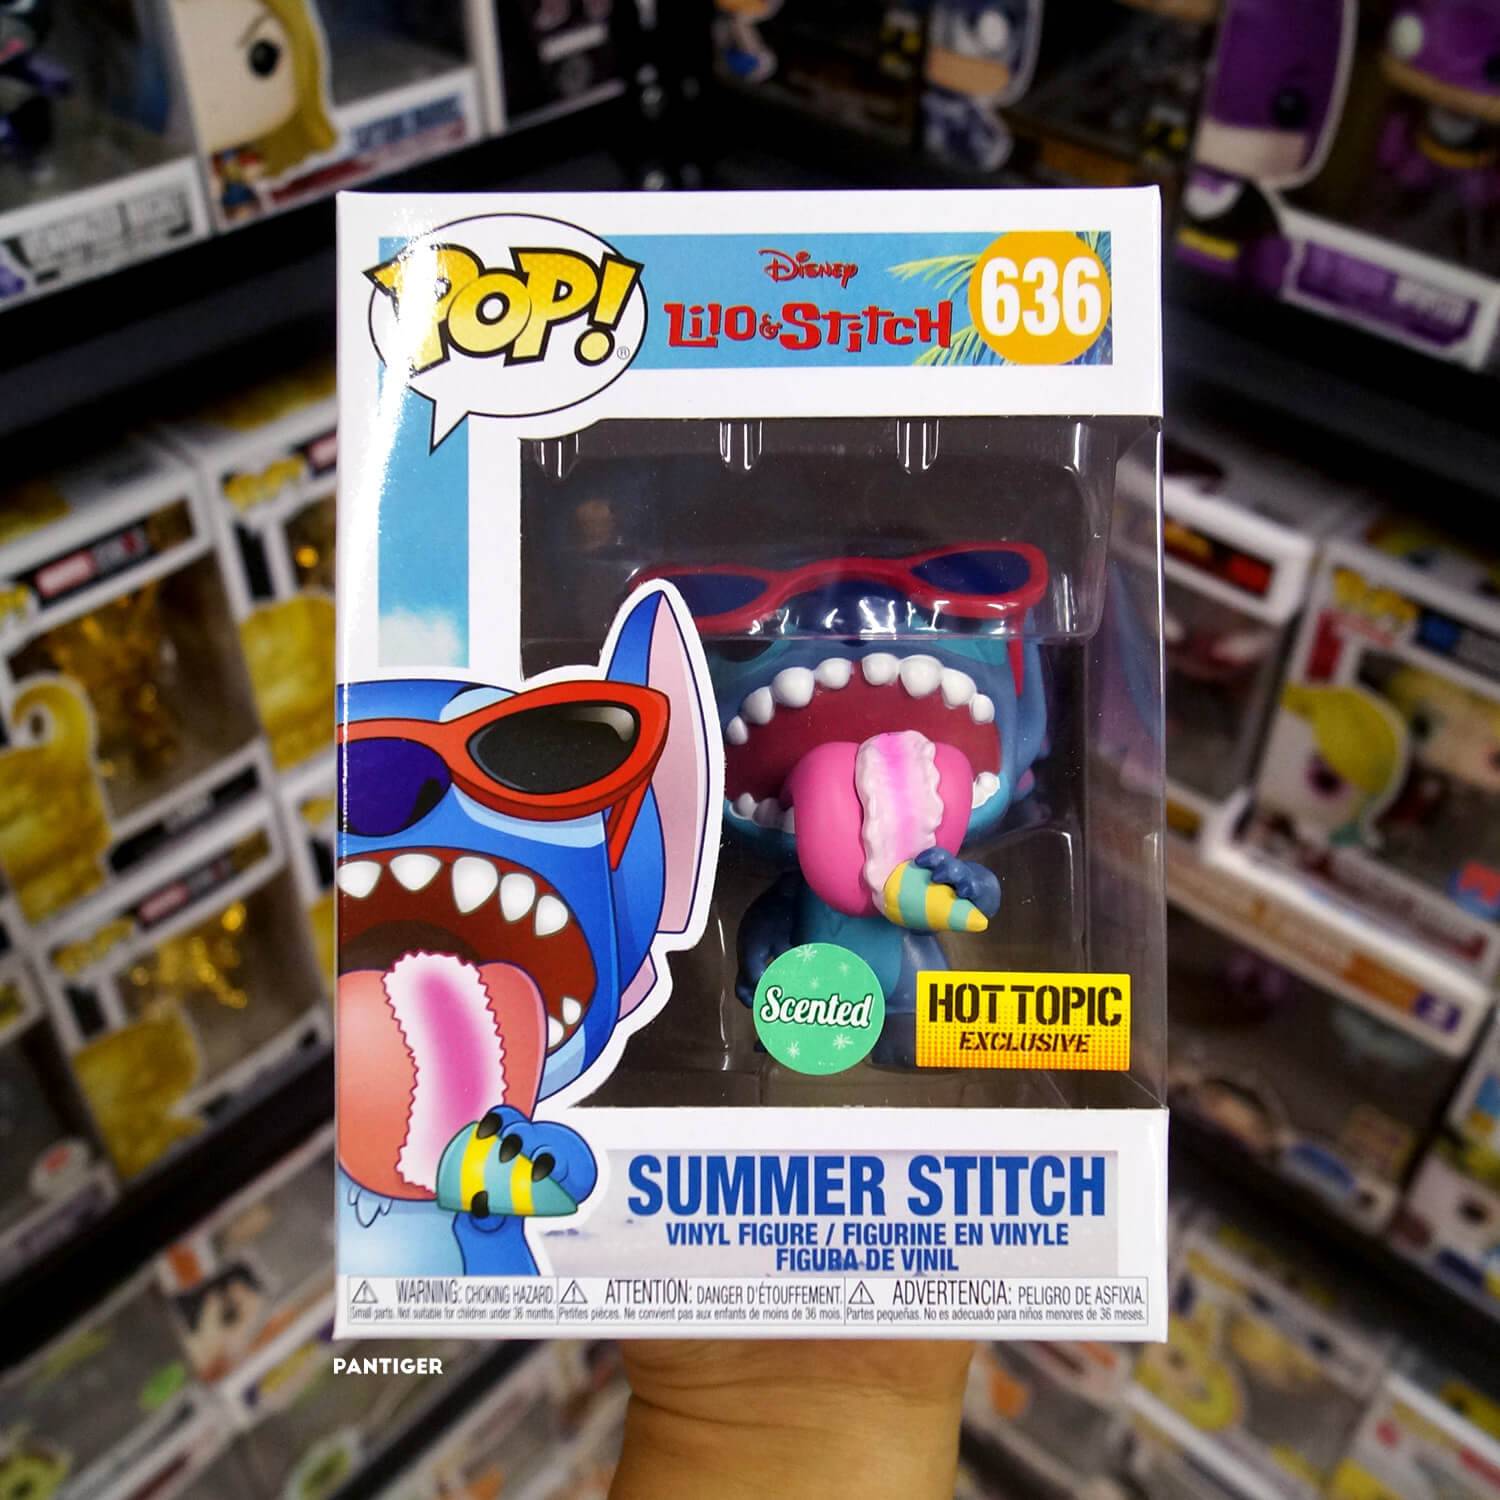 Summer Stitch is now available!